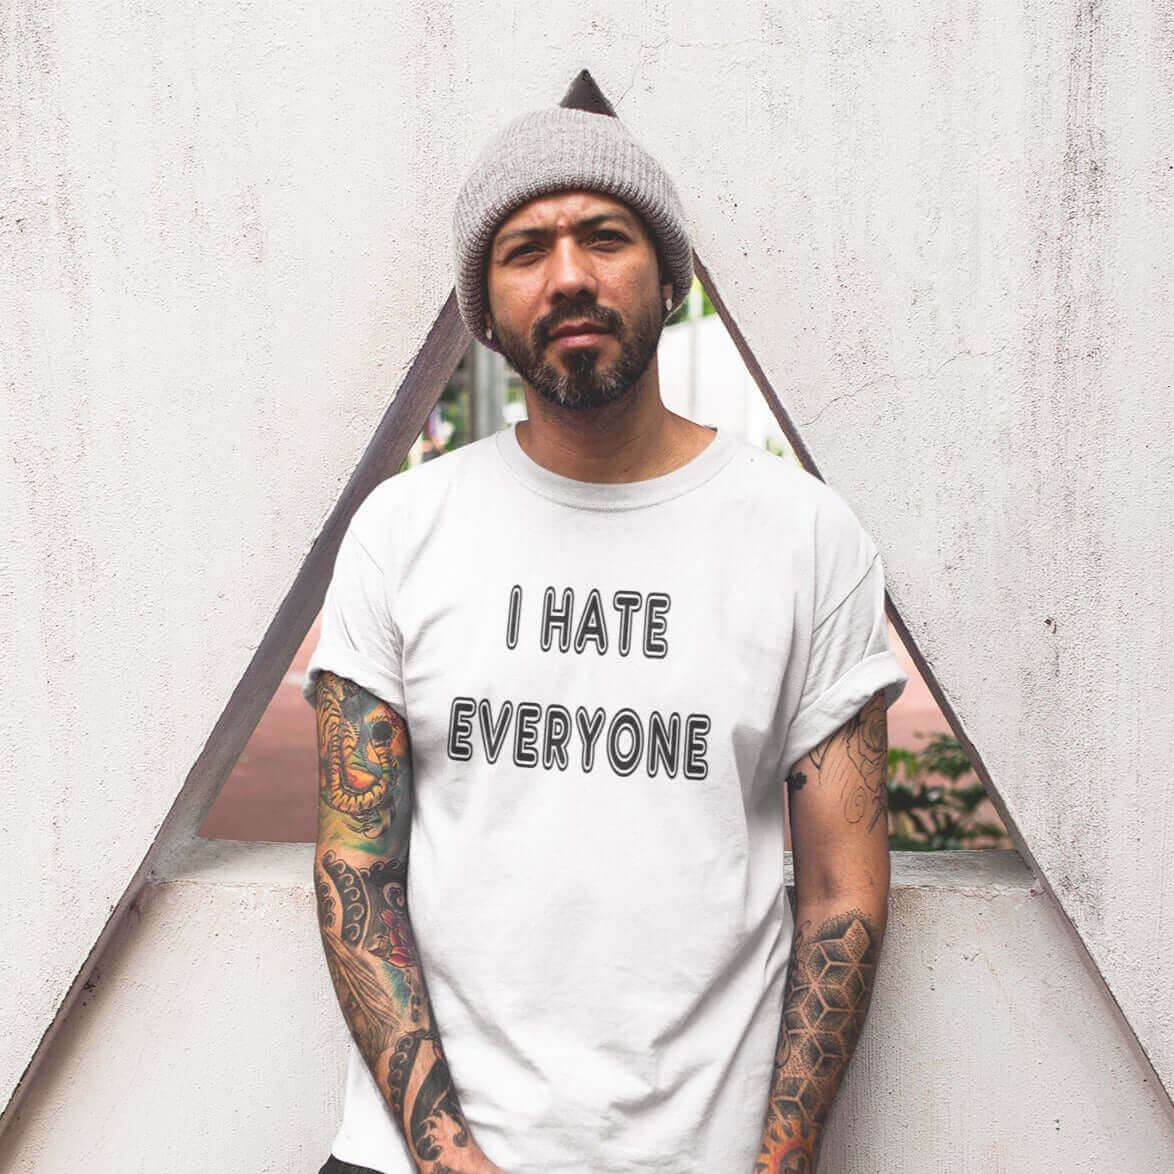 Man leaning against wall wearing white t-shirt with the words I hate everyone printed on the front.